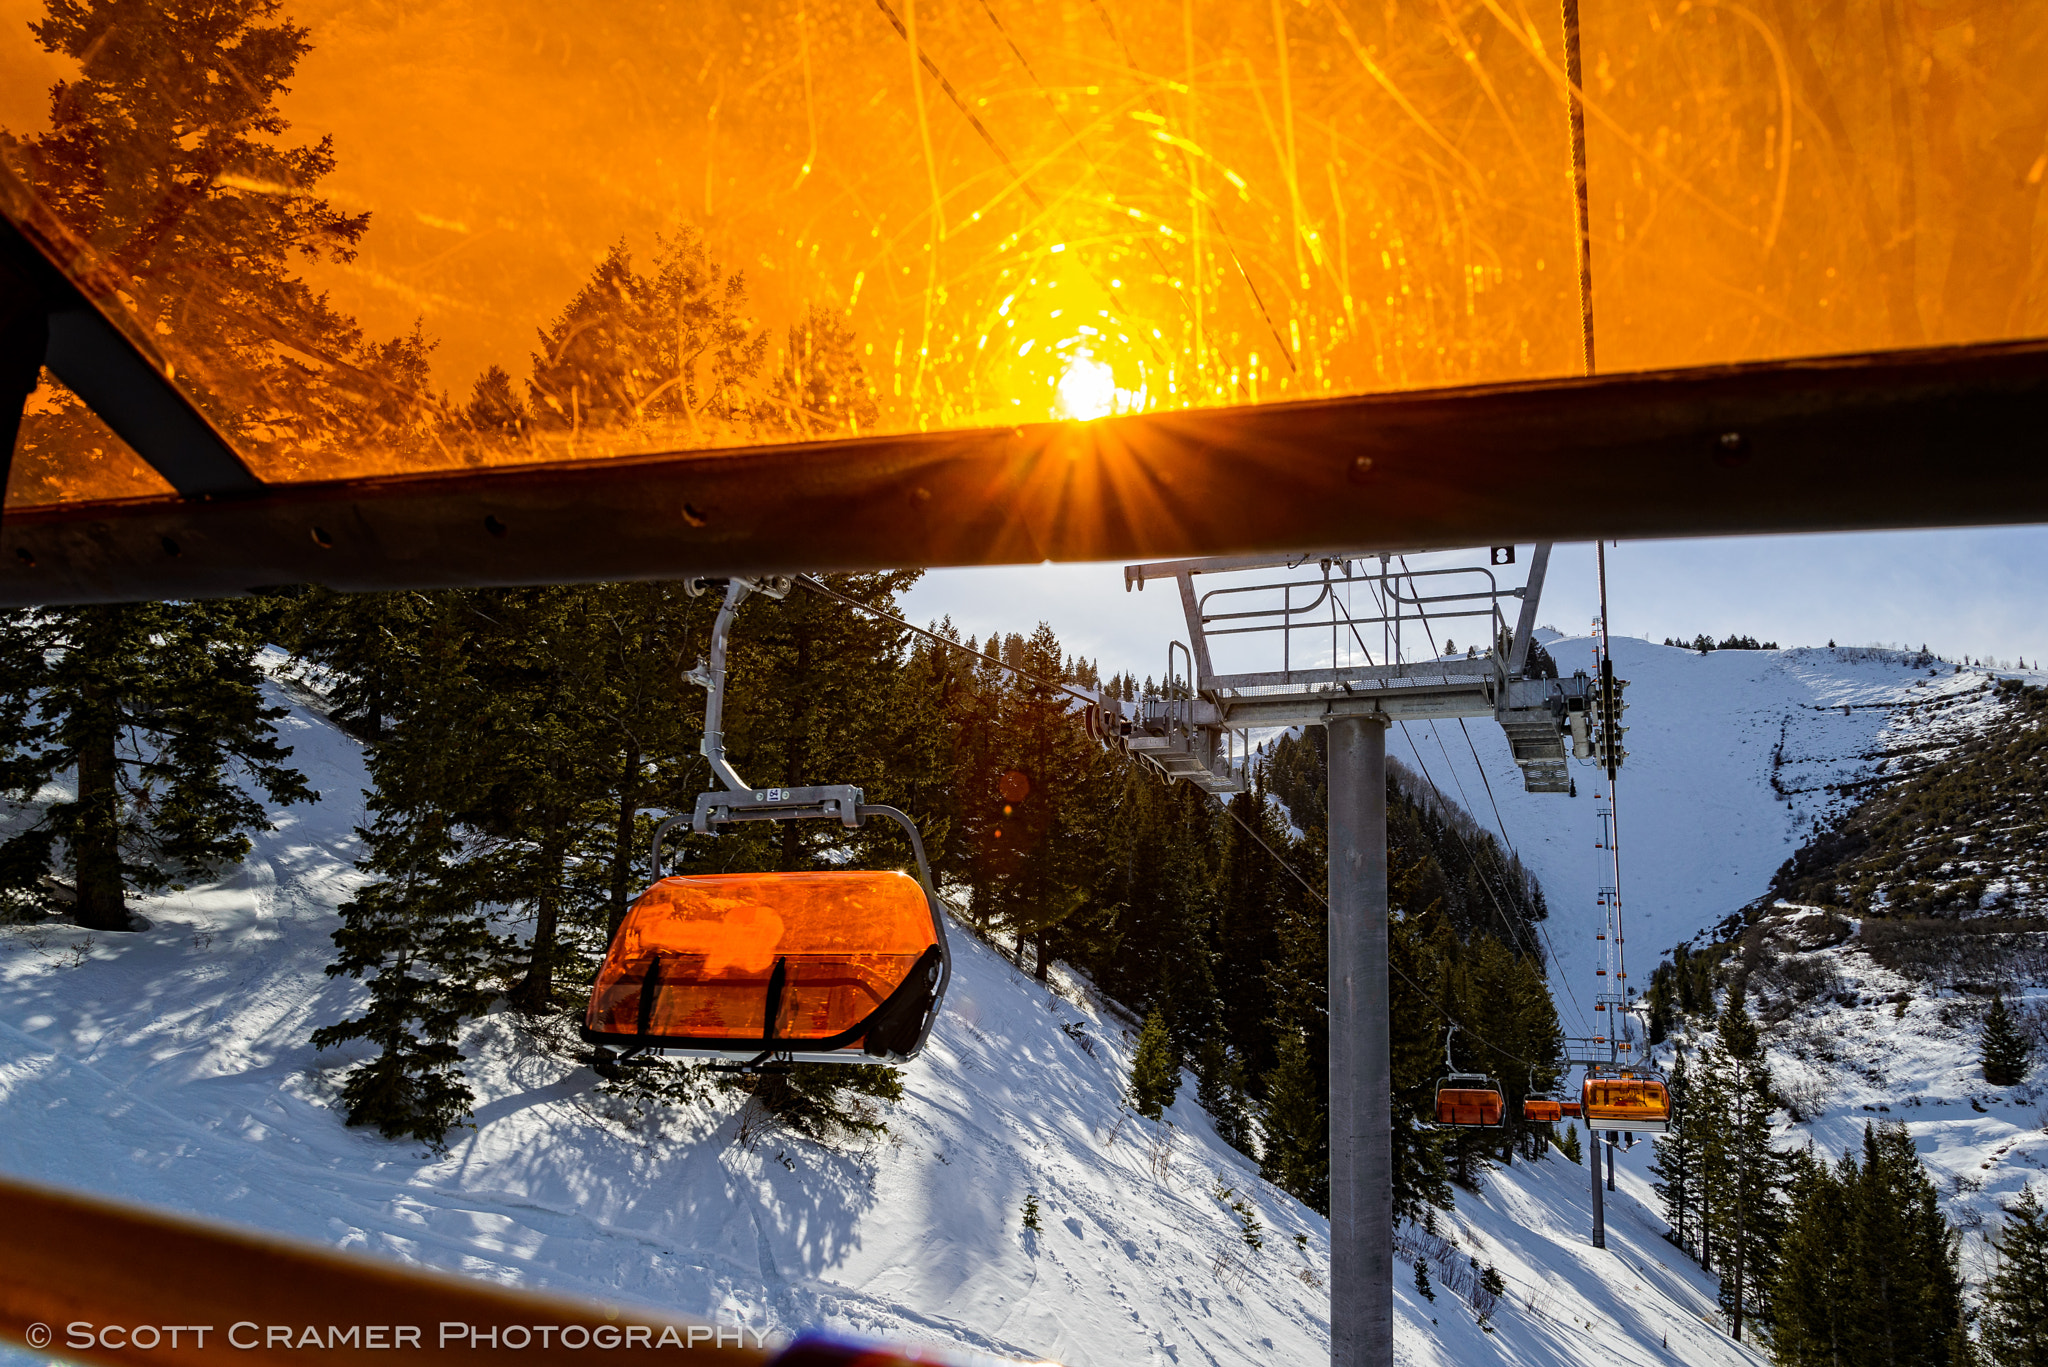 Riding Chairlift in Winter